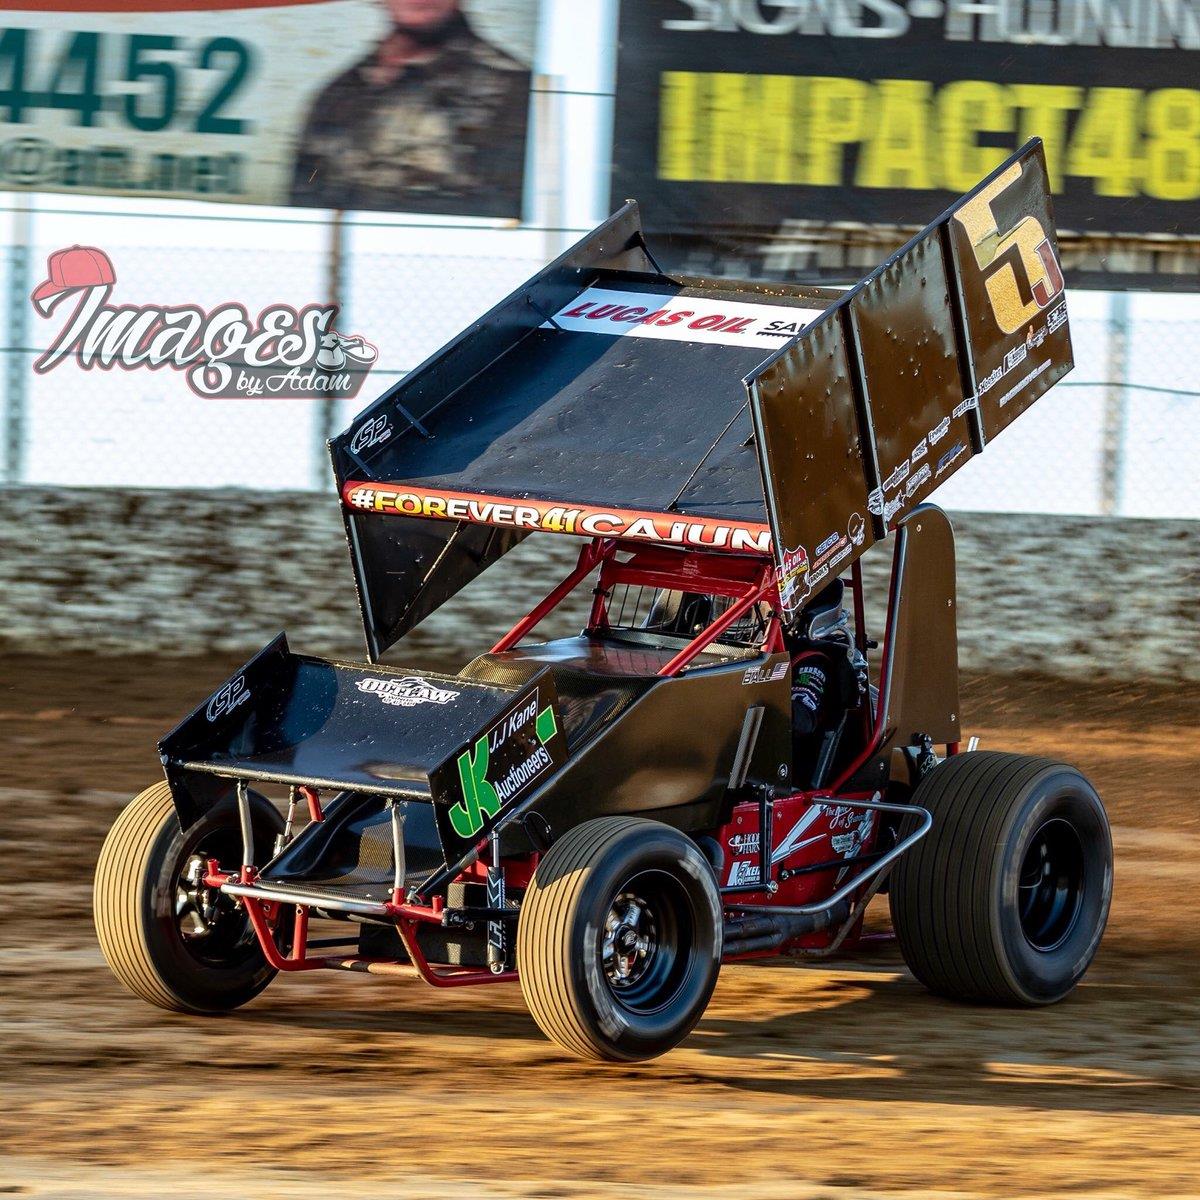 Ball Earns First Heat Win and Nets Top-10 Finish at Lake Ozark Speedway